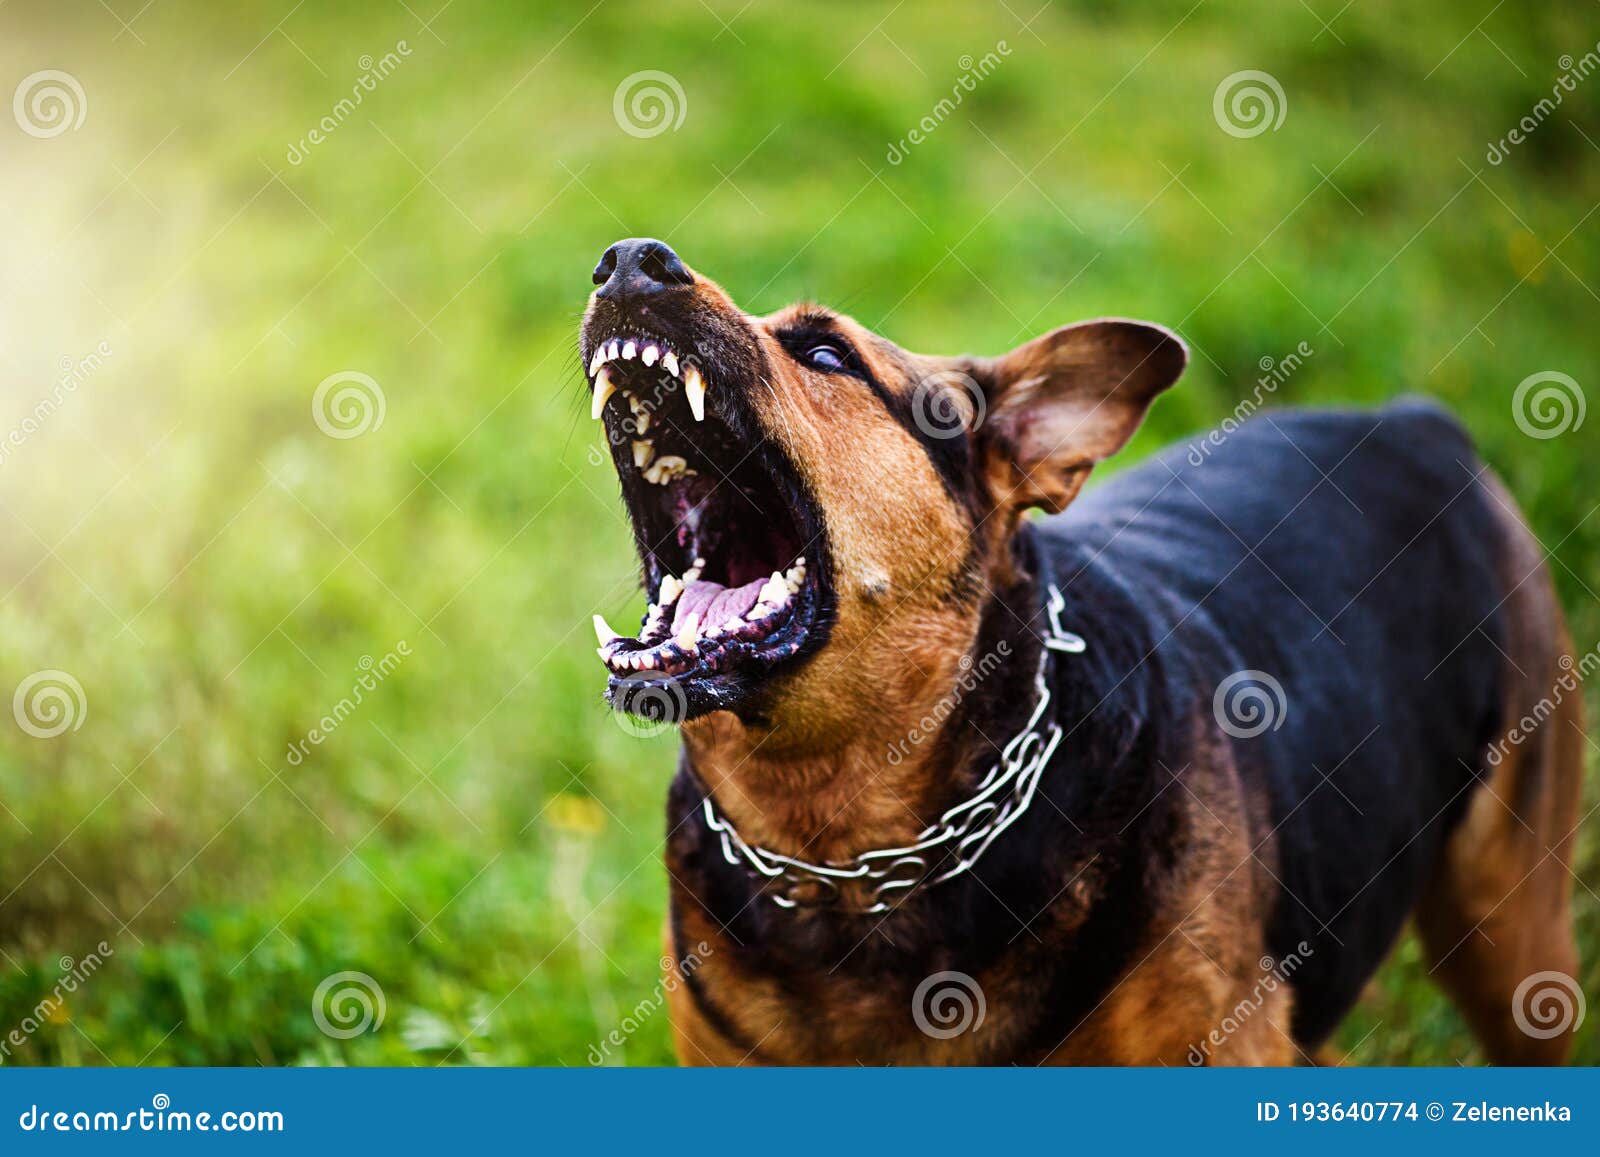 angry dog attacks. the dog looks aggressive and dangerous